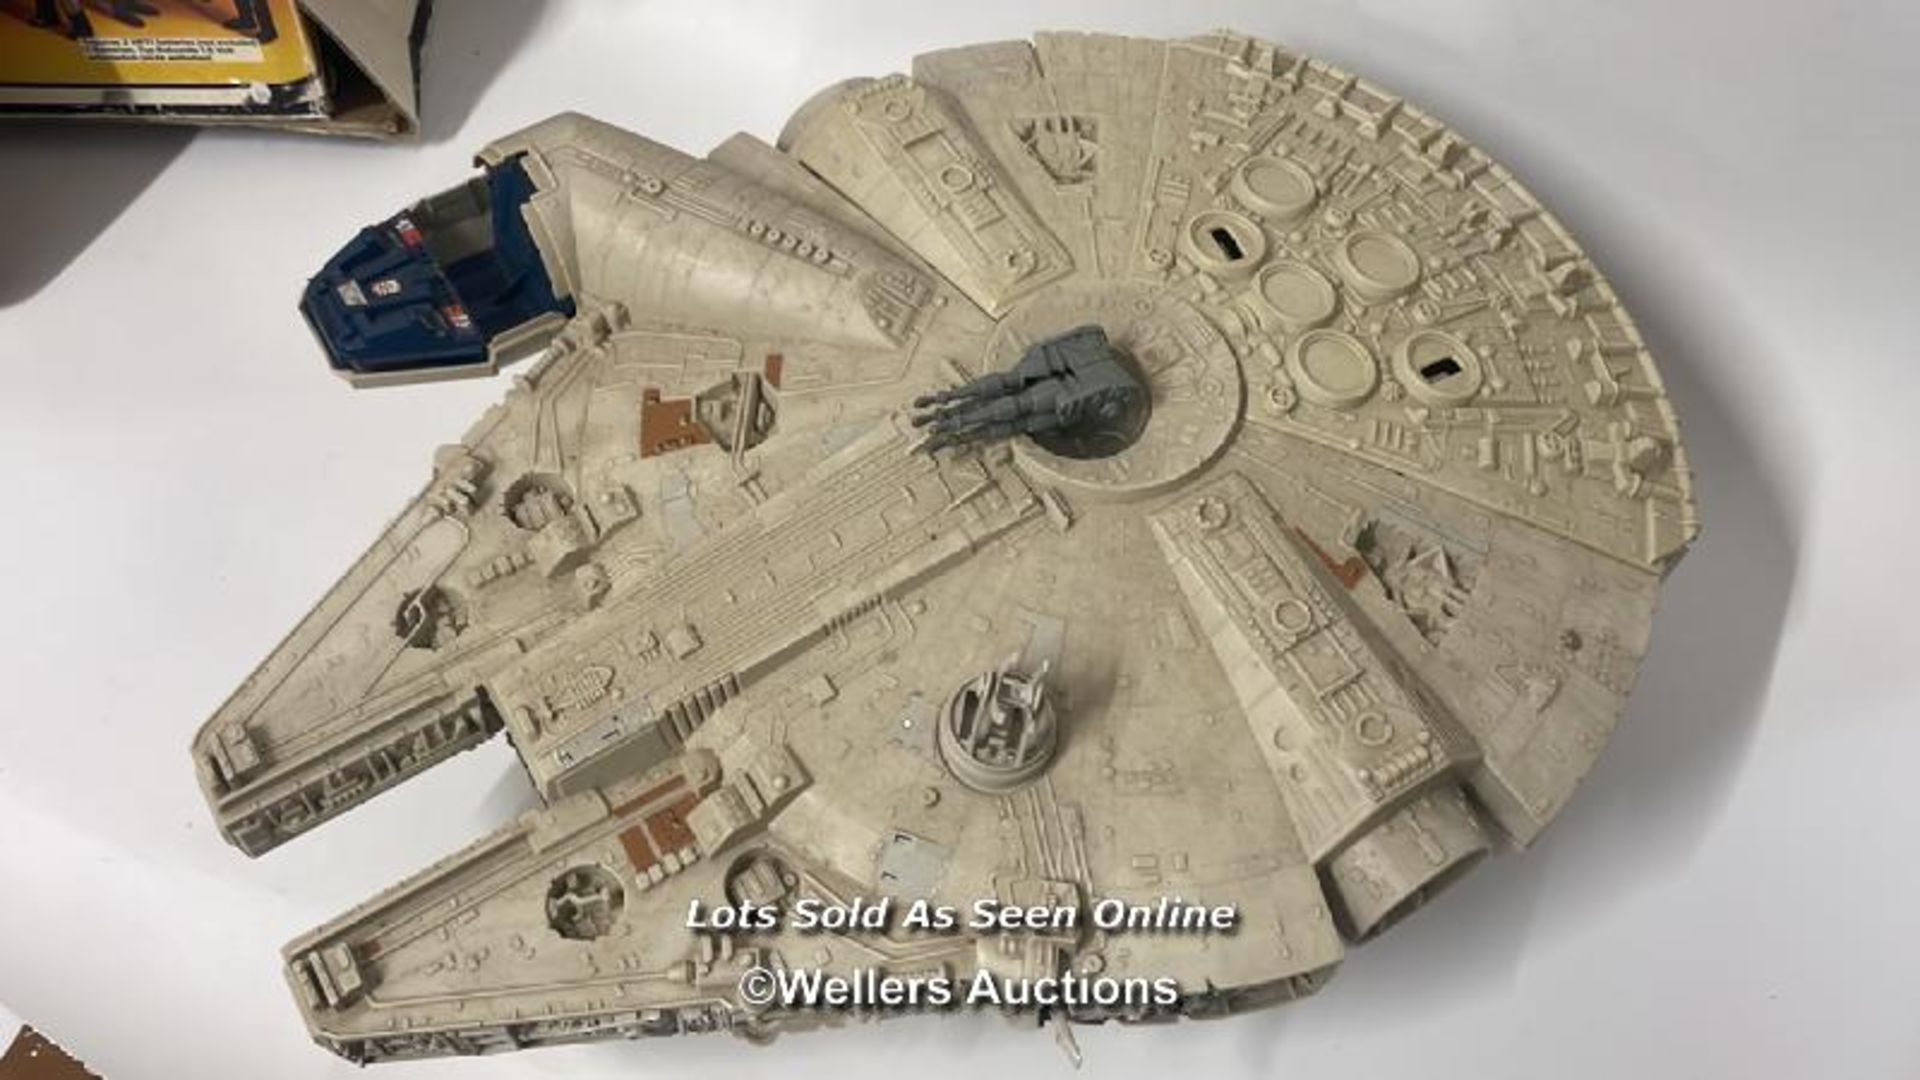 Palitoy vintage Return of the Jedi Millenium Falcon vehicle, with original training ball and floor - Image 2 of 11